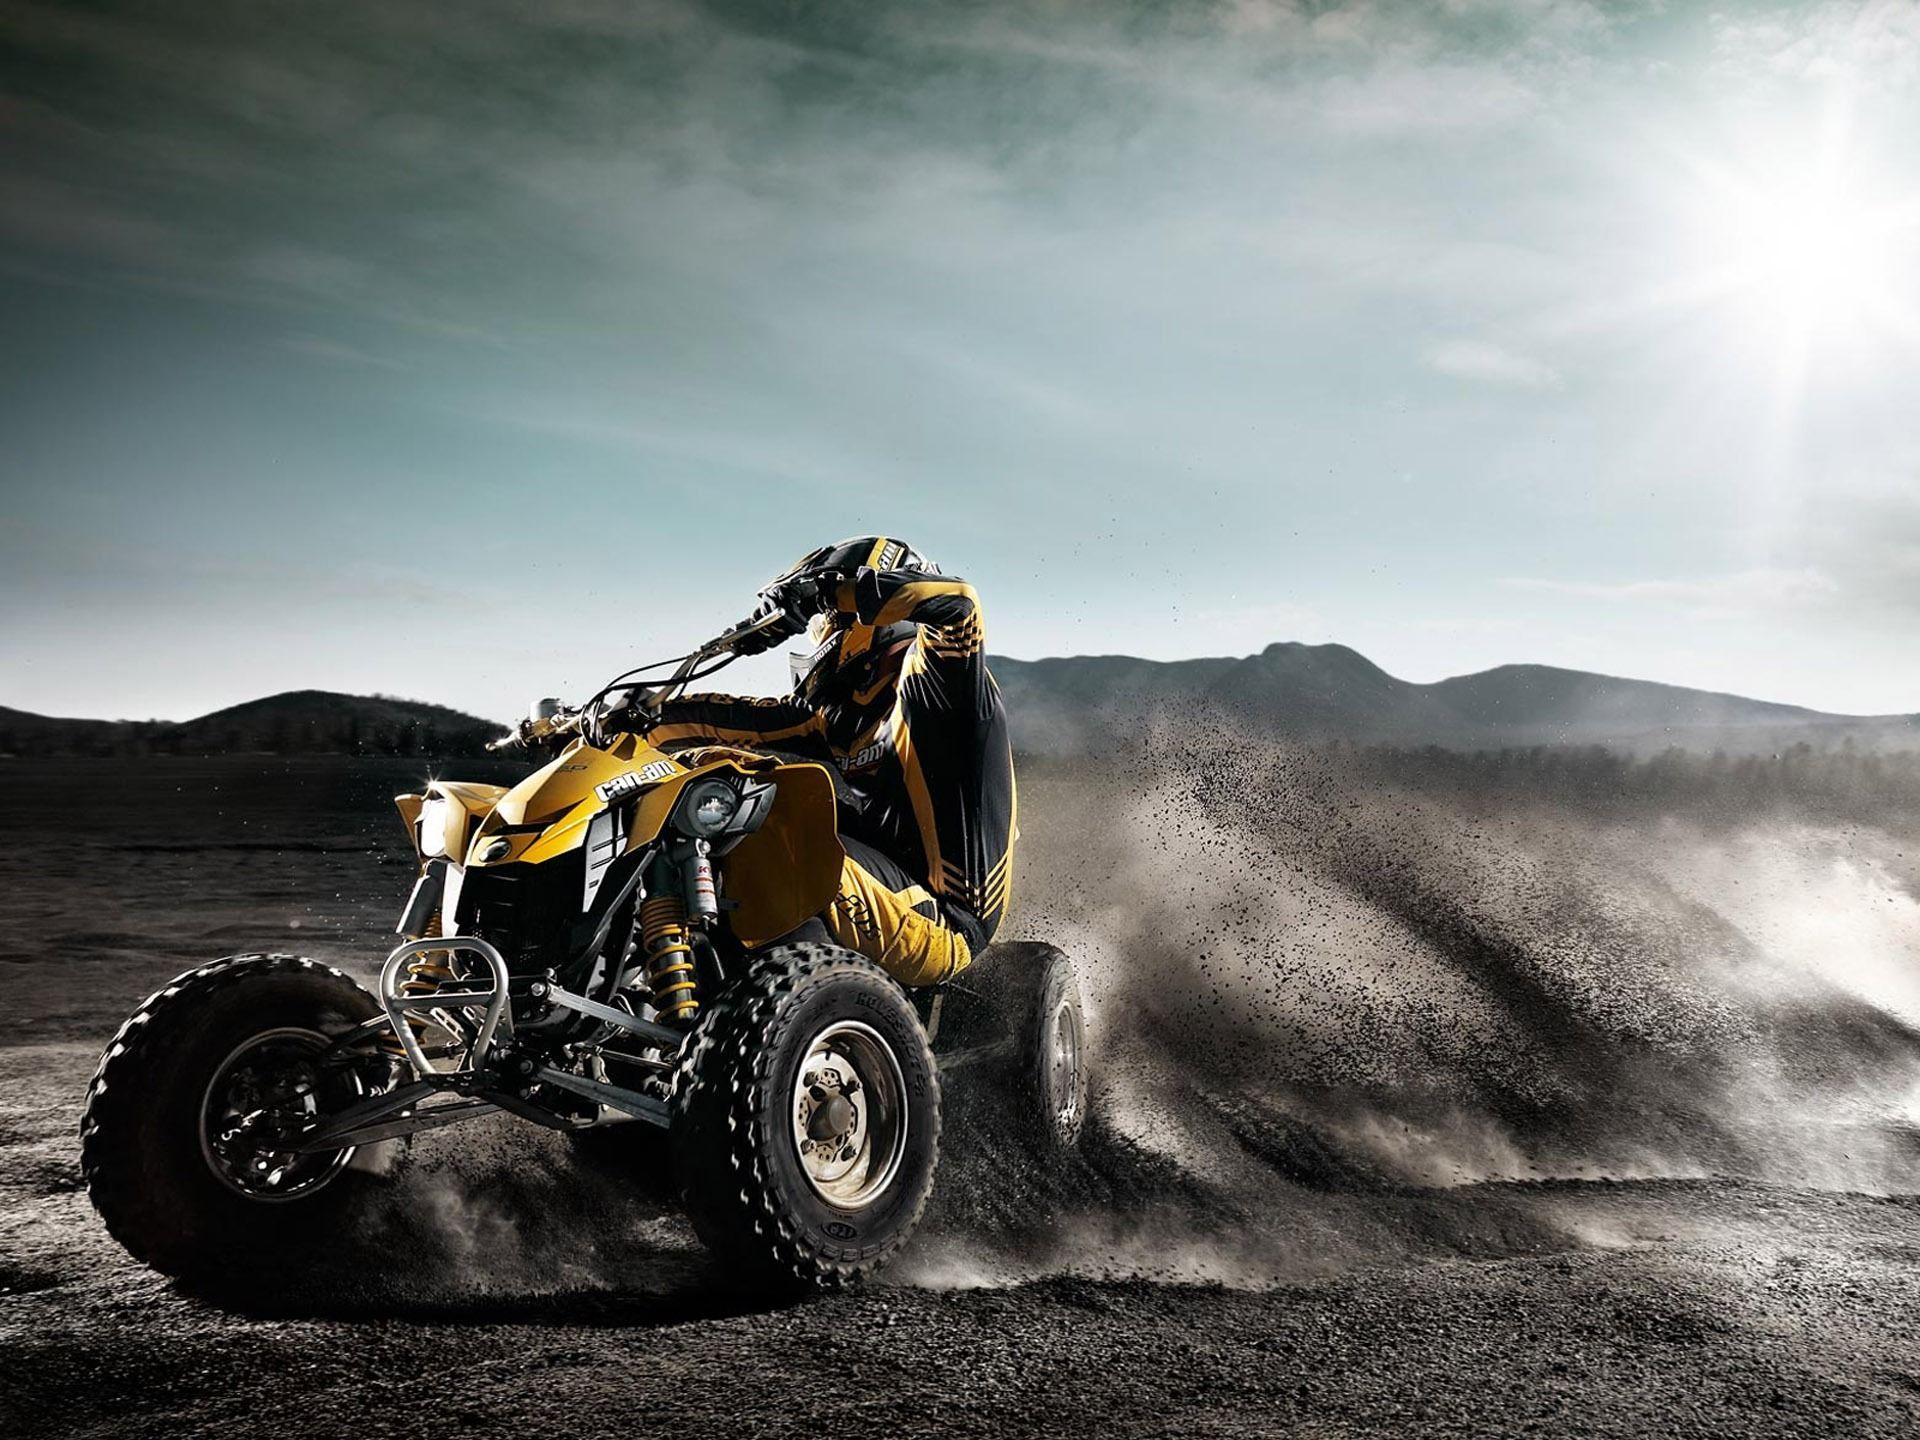 ATV Wallpapers Other Cars Wallpapers in jpg format for free download